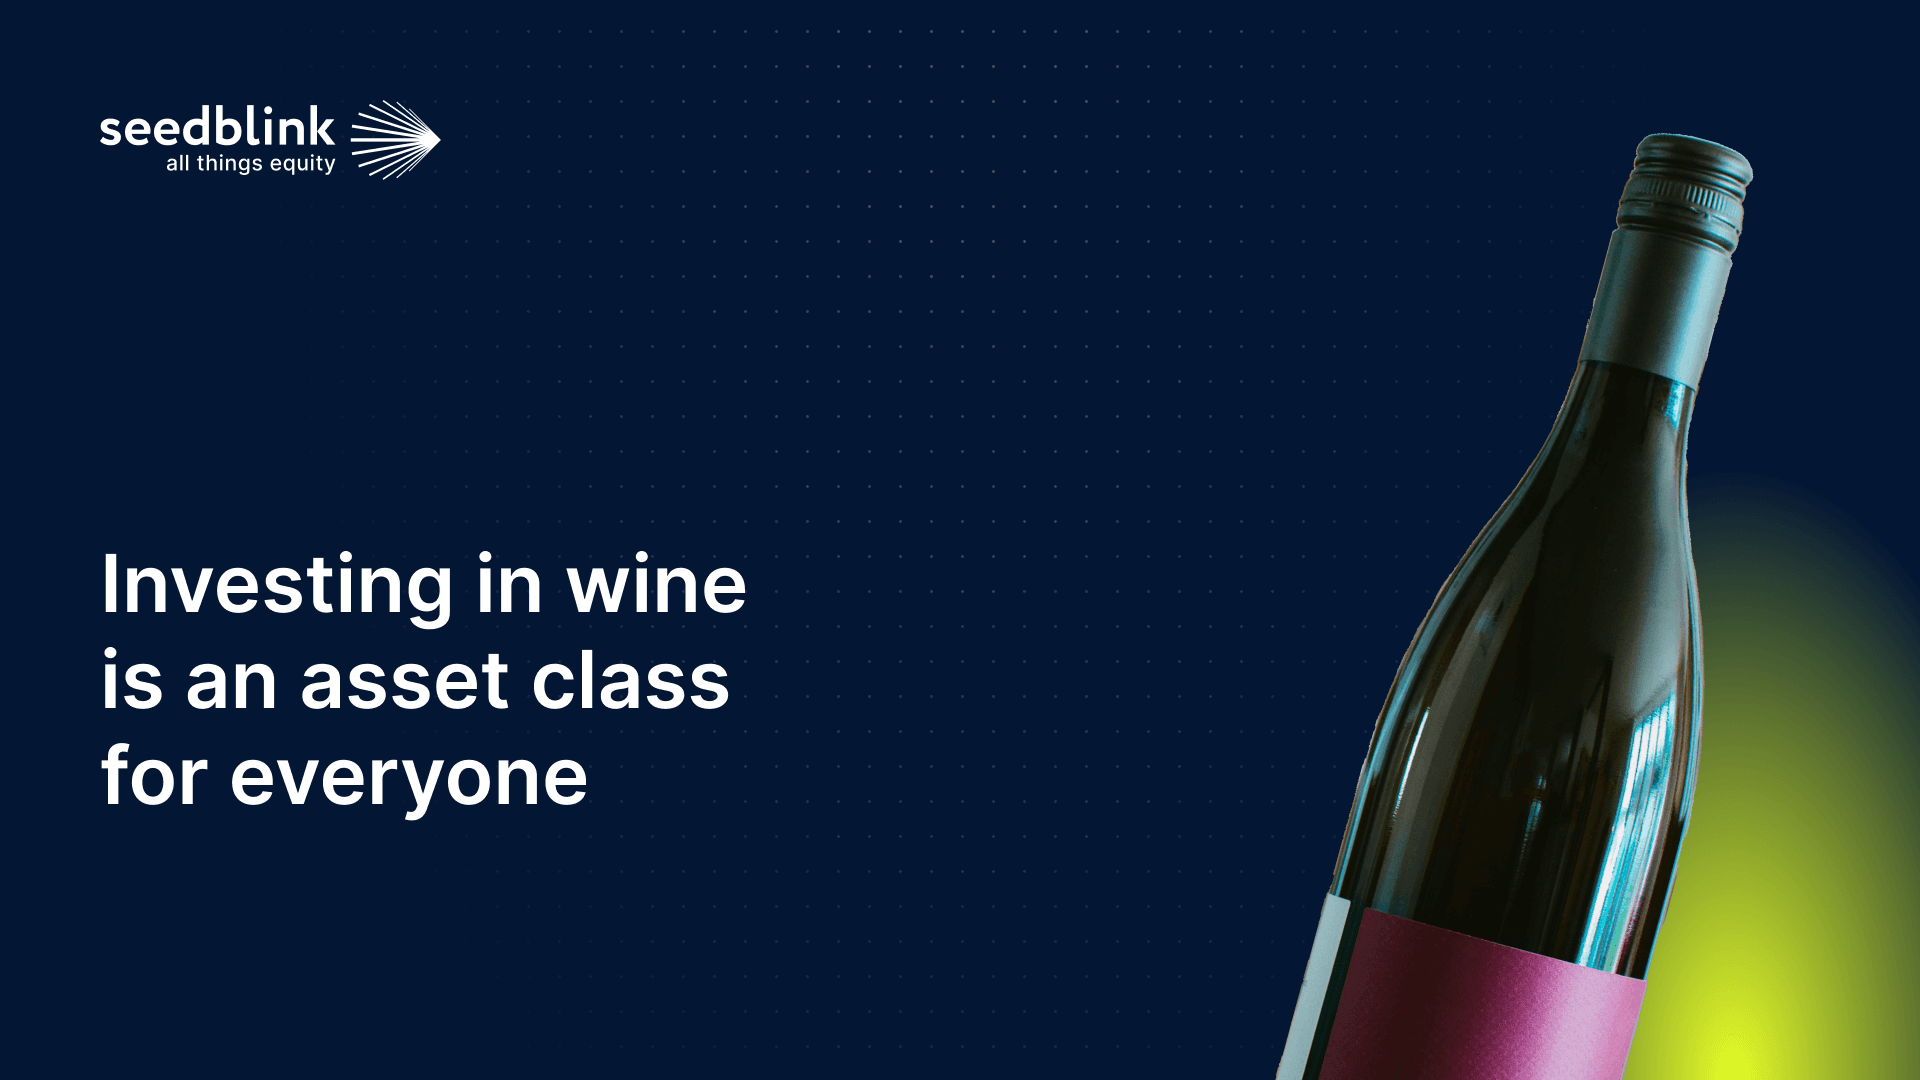 Investing in wine – an asset class for everyone